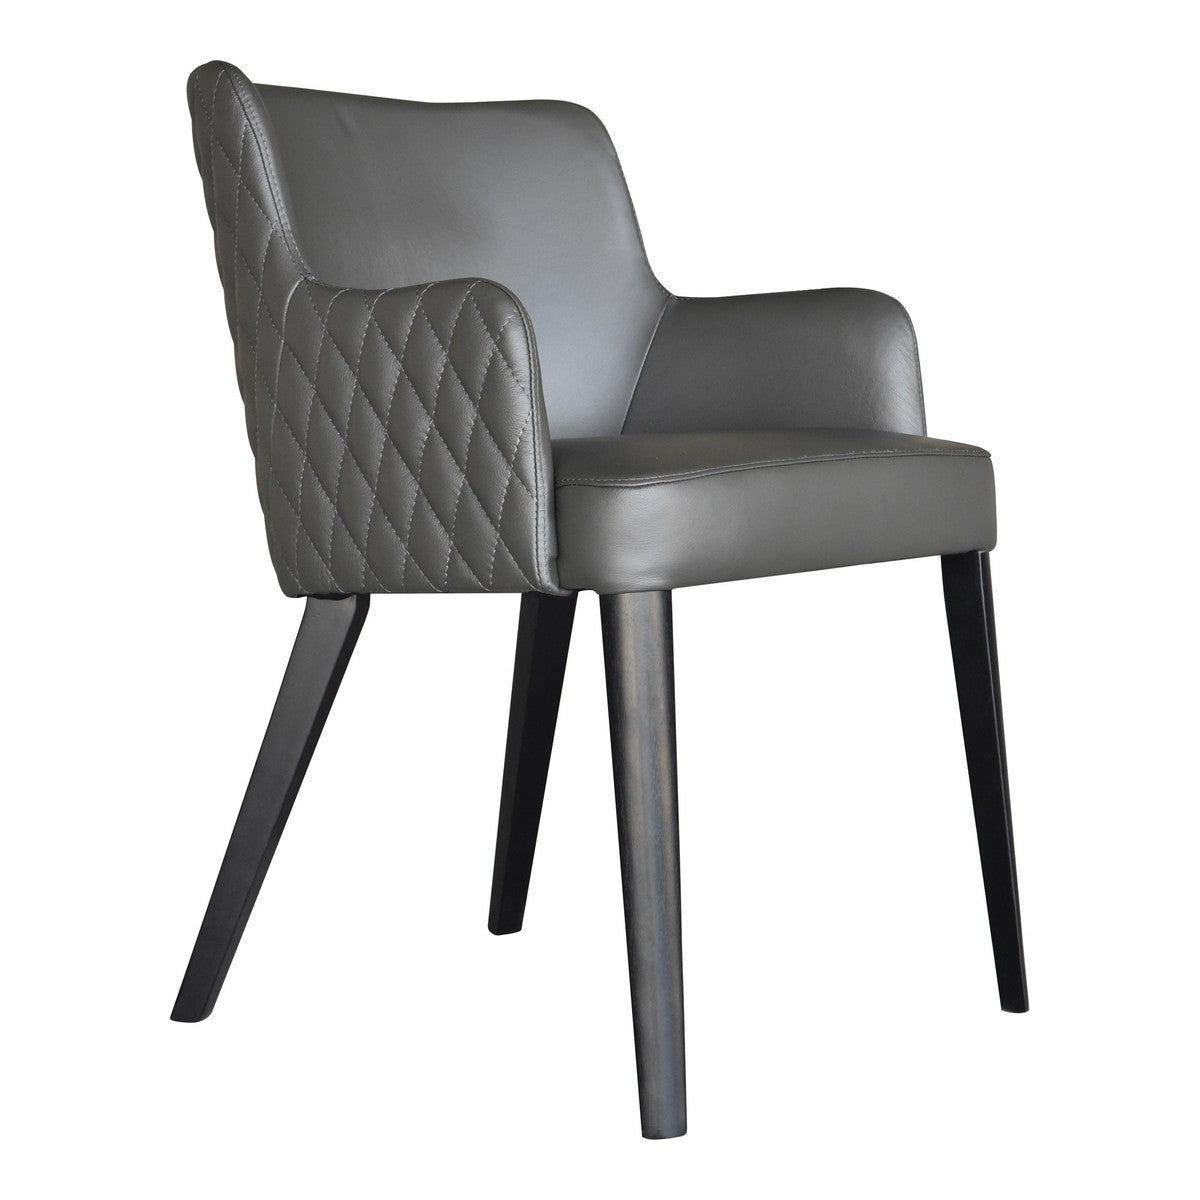 Moe's Home Collection Zayden Dining Chair Grey - GO-1004-29